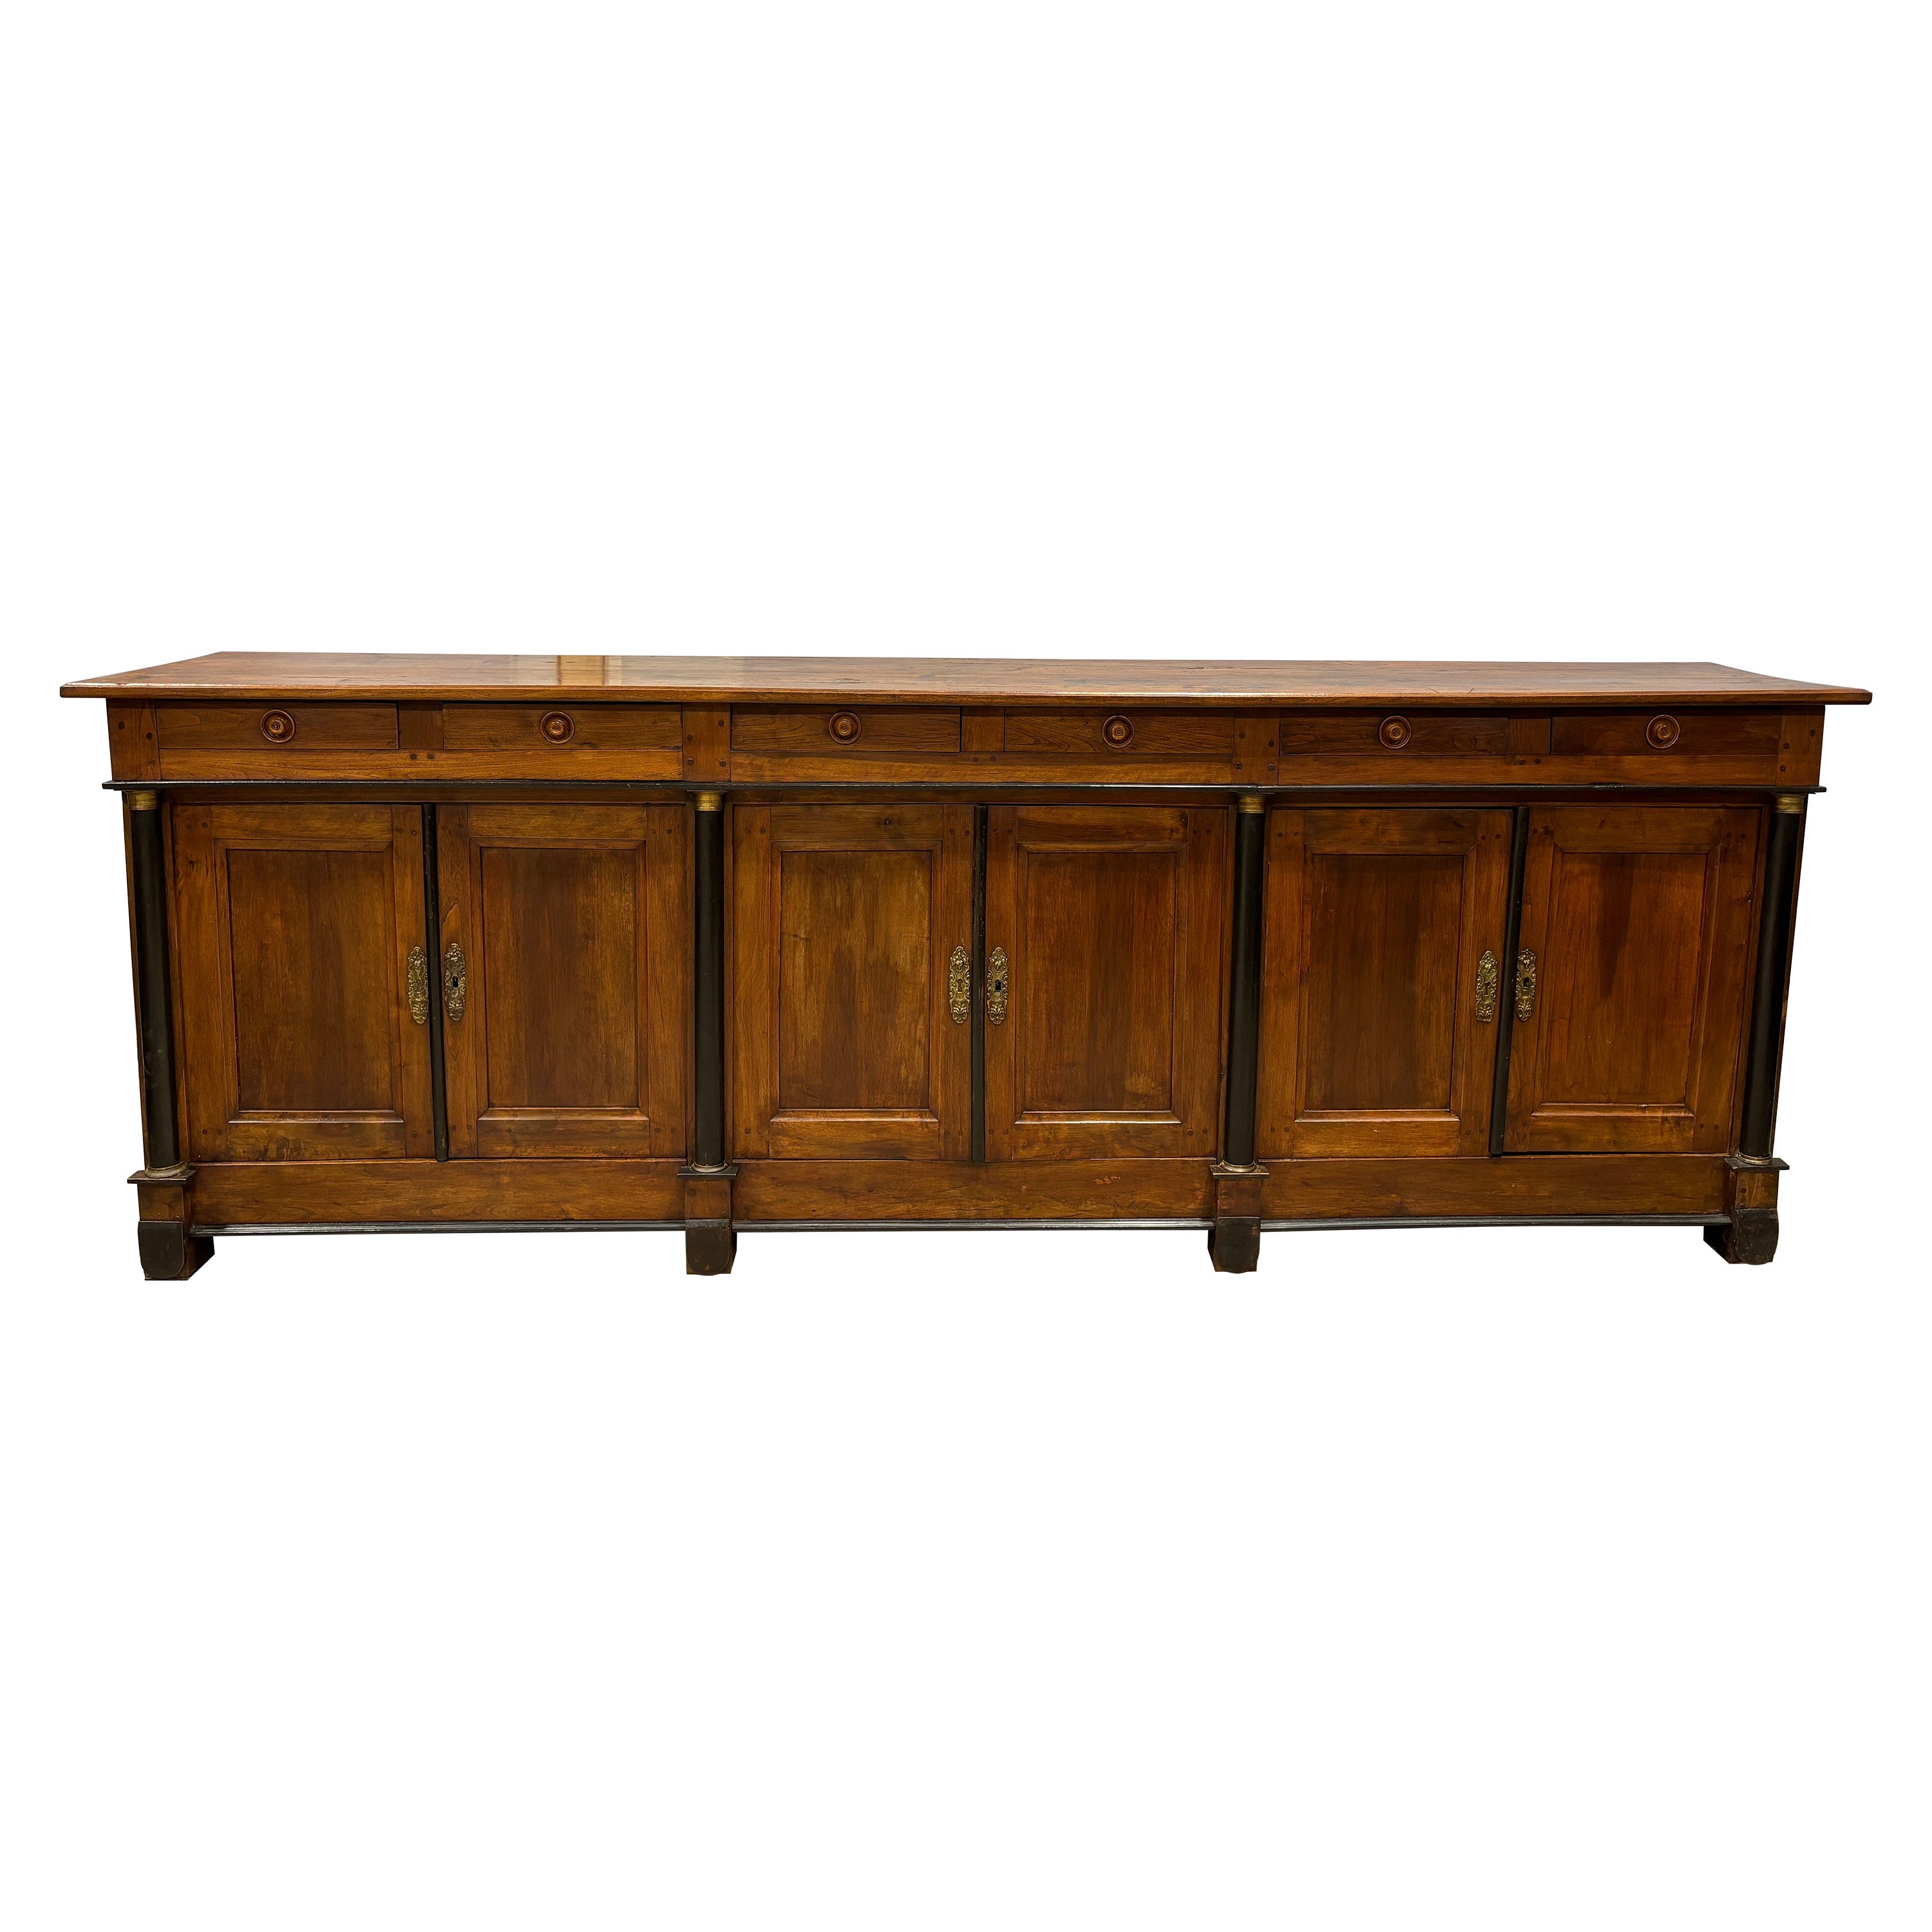 French Early 19th Century Empire Sideboard For Sale